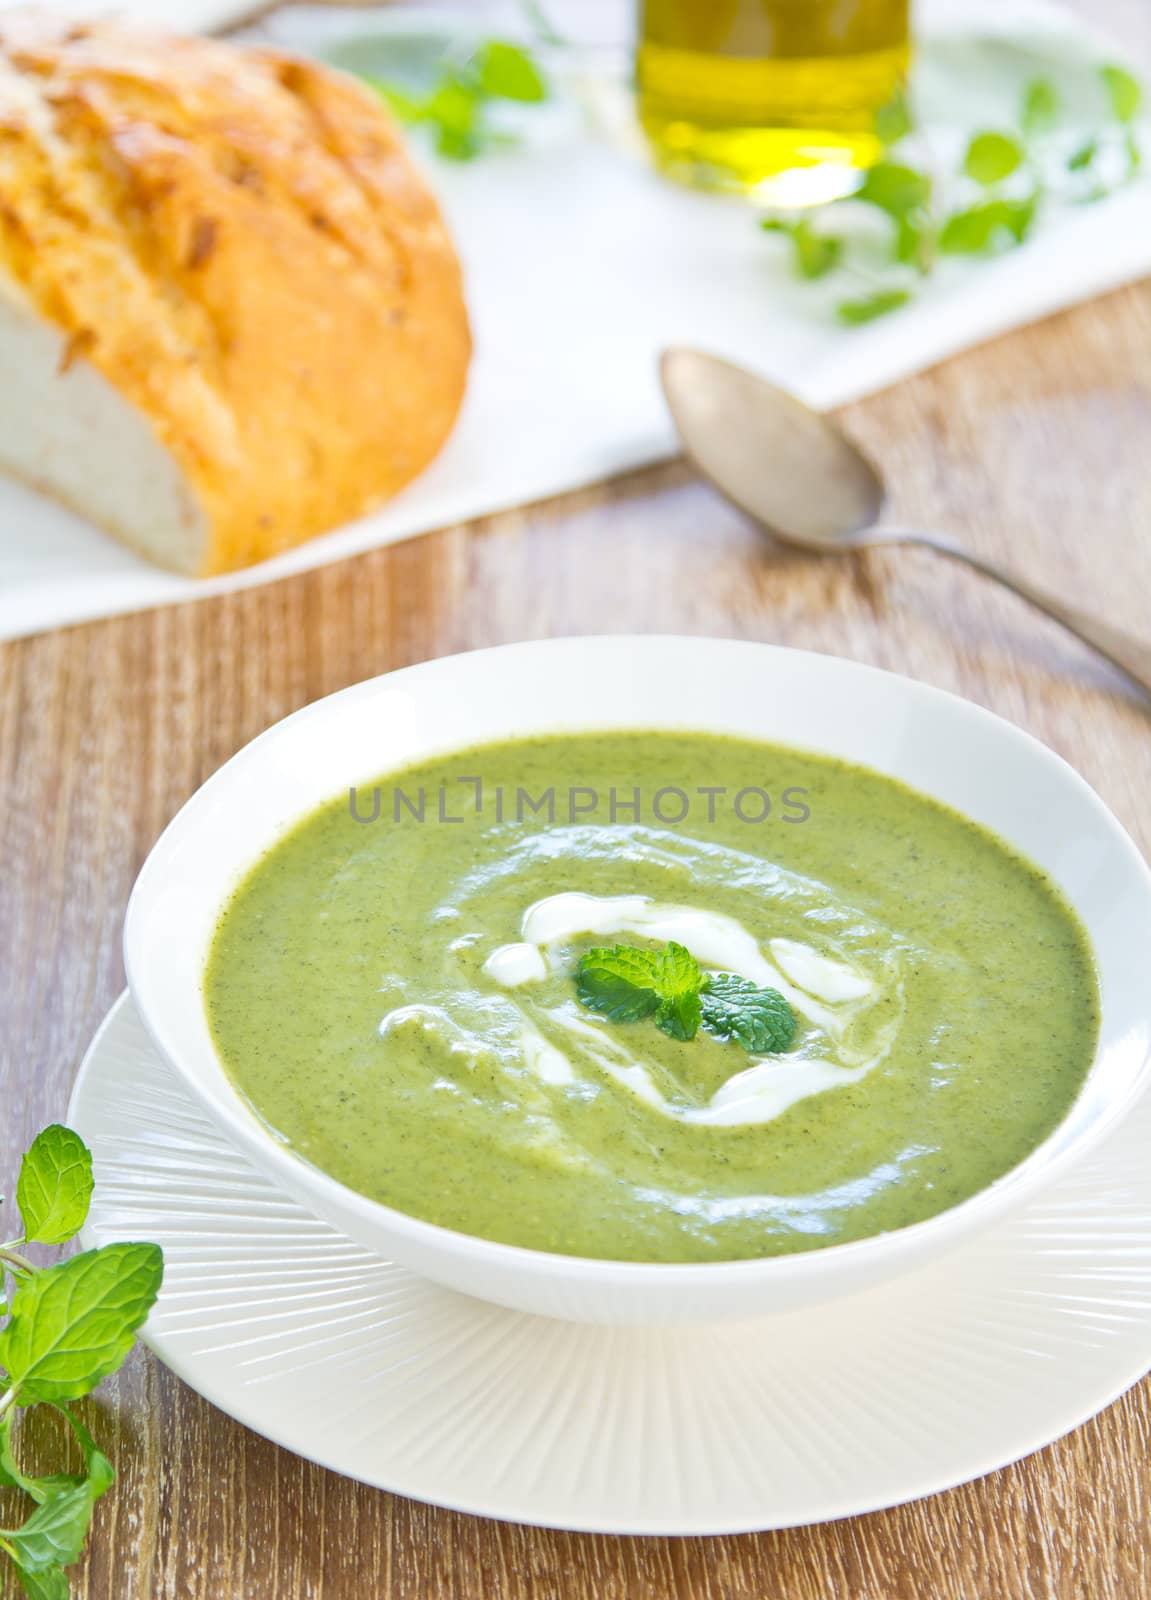 Pea,mint and celery soup with cream on top by a loaf of bread